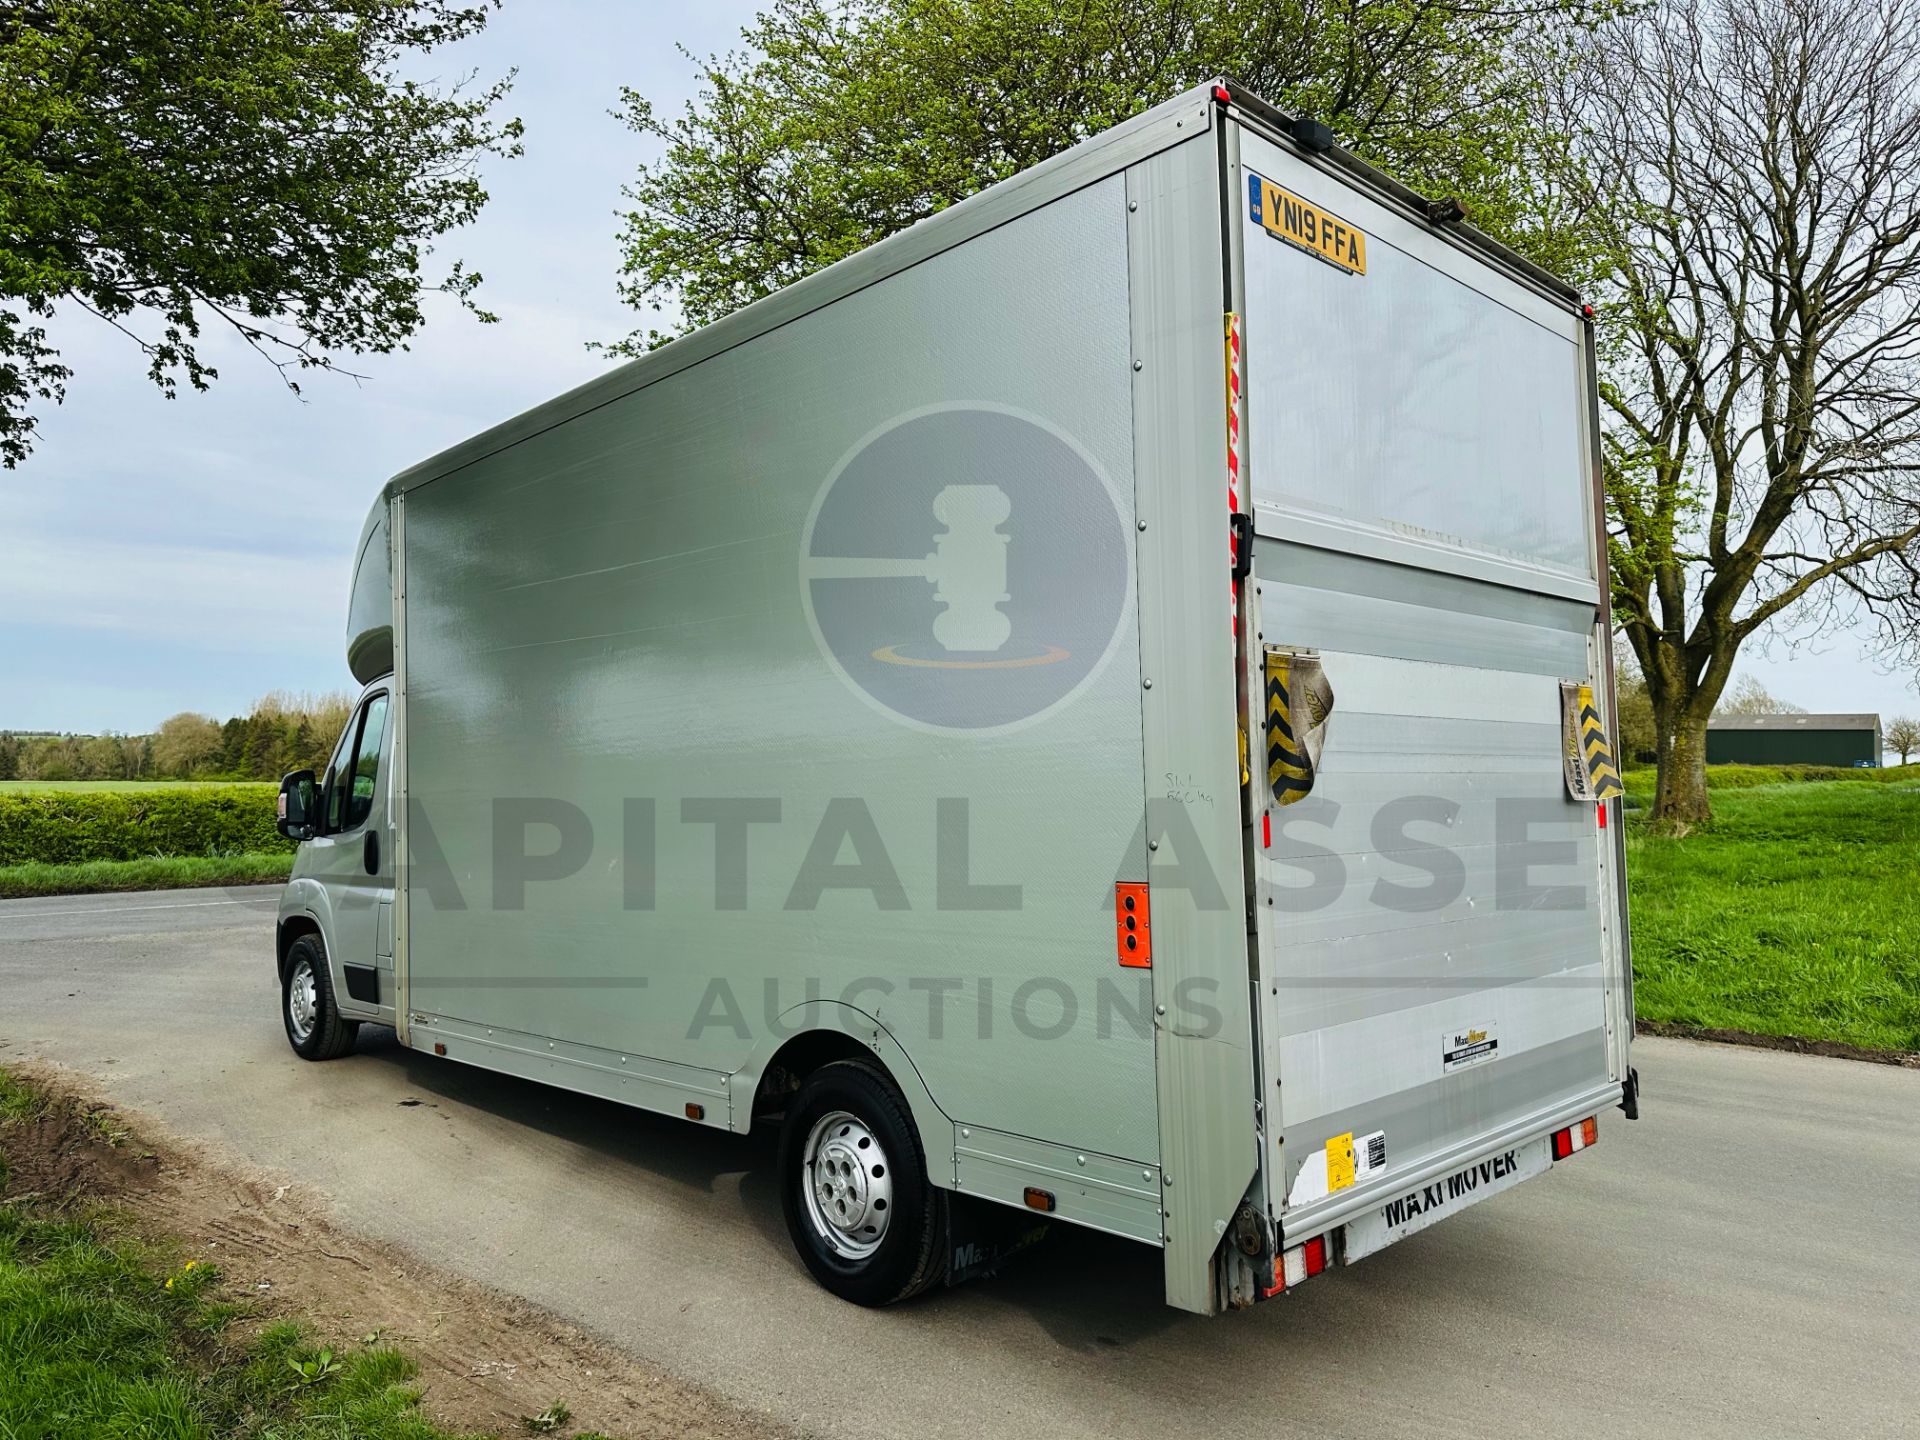 (ON SALE) PEUGEOT BOXER 335 *LWB LOW LOADER / MAXI MOVER LUTON* (2019 - EURO 6) 2.0 BLUE HDI *A/C* - Image 7 of 27